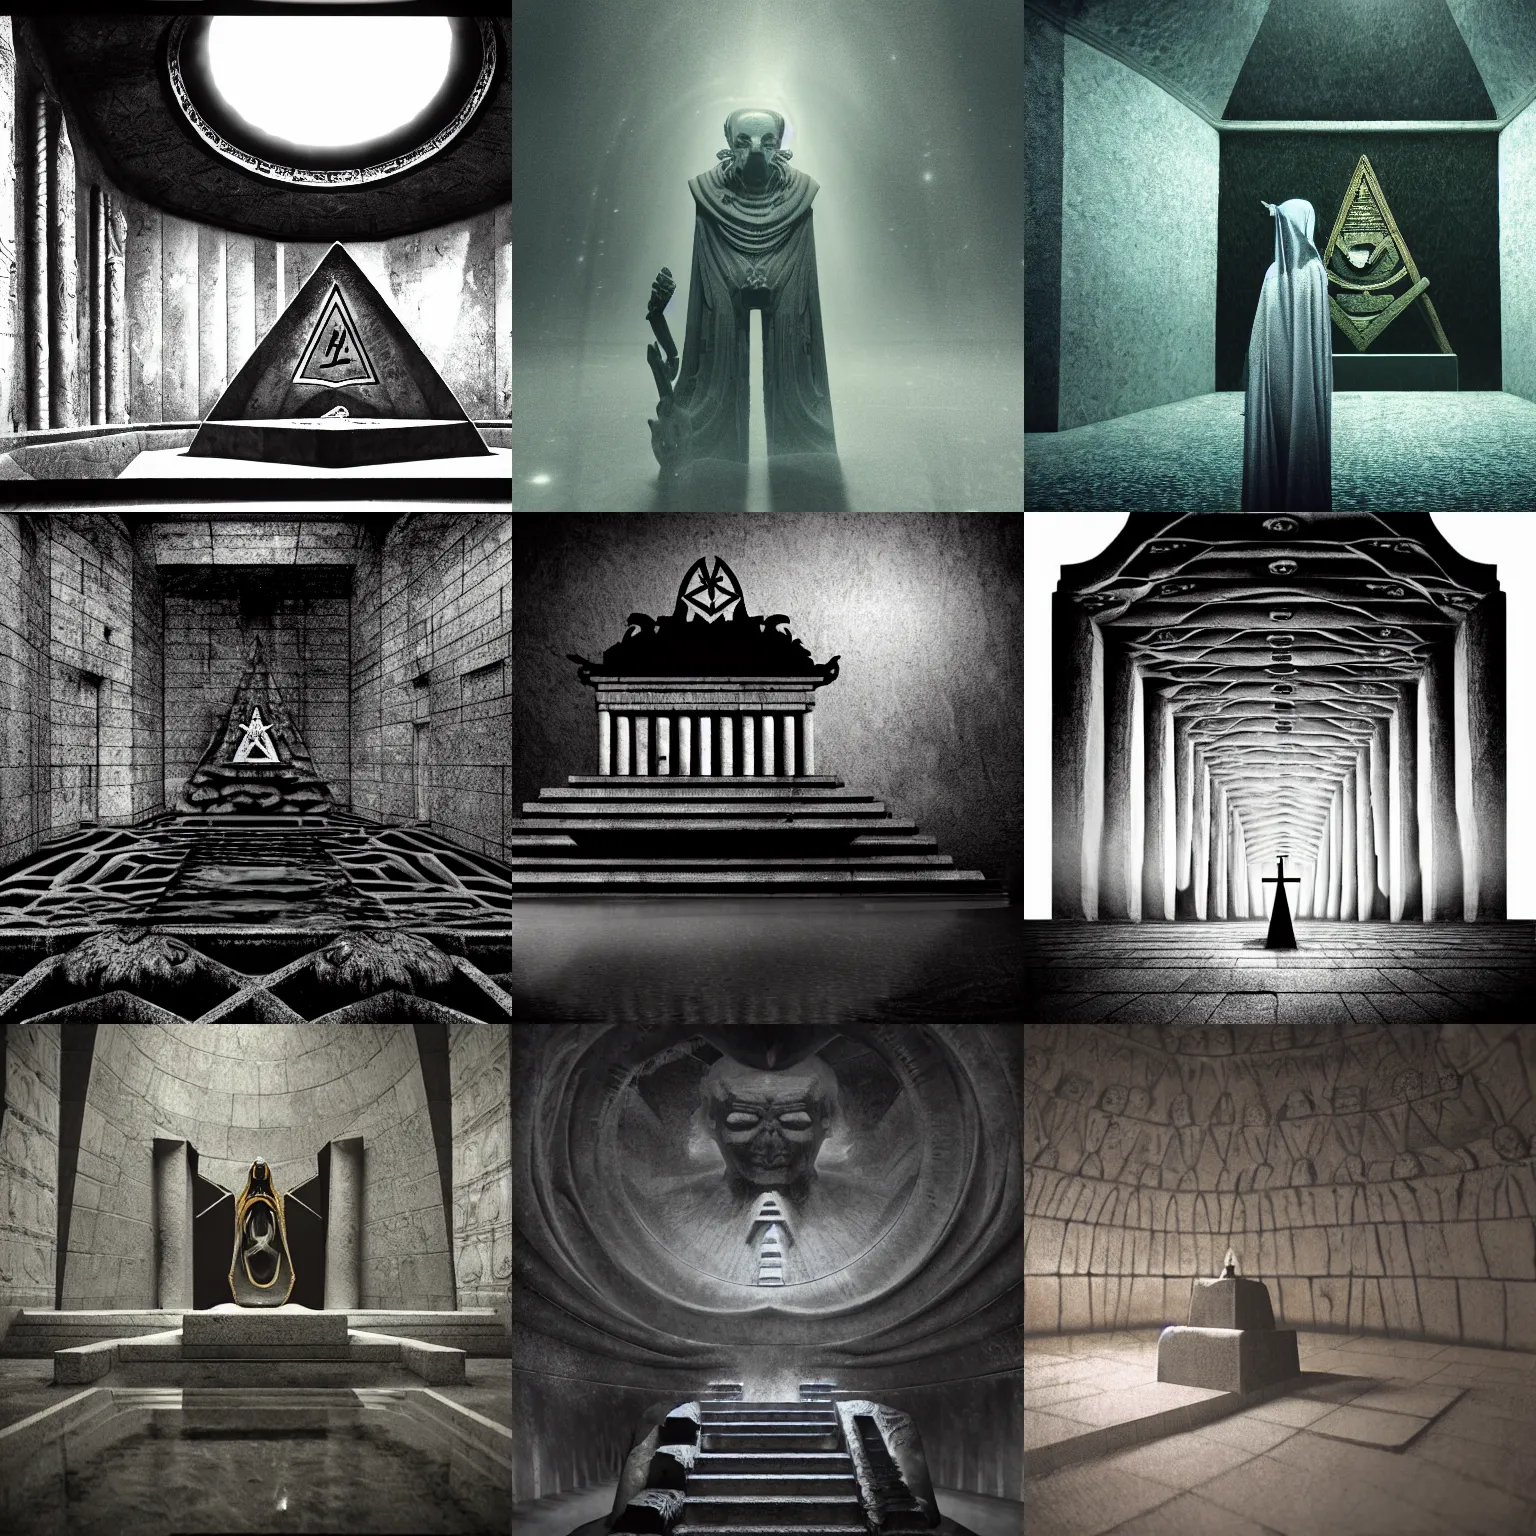 Prompt: Demonic masonic style occult hyperrealism cinematic dark magus style seinen manga film still inspired by tomb(1970), submerged temple scene, regalia half submerged in heavy oil, tilt shift zaha hadid designed babylonian temple background, Panavision X III , 8K, 35mm lens, three point perspective, chiaroscuro, highly detailed, golden ratio, by Allister Crowley, by moma, by Nabbteeri by Sergey Piskunov